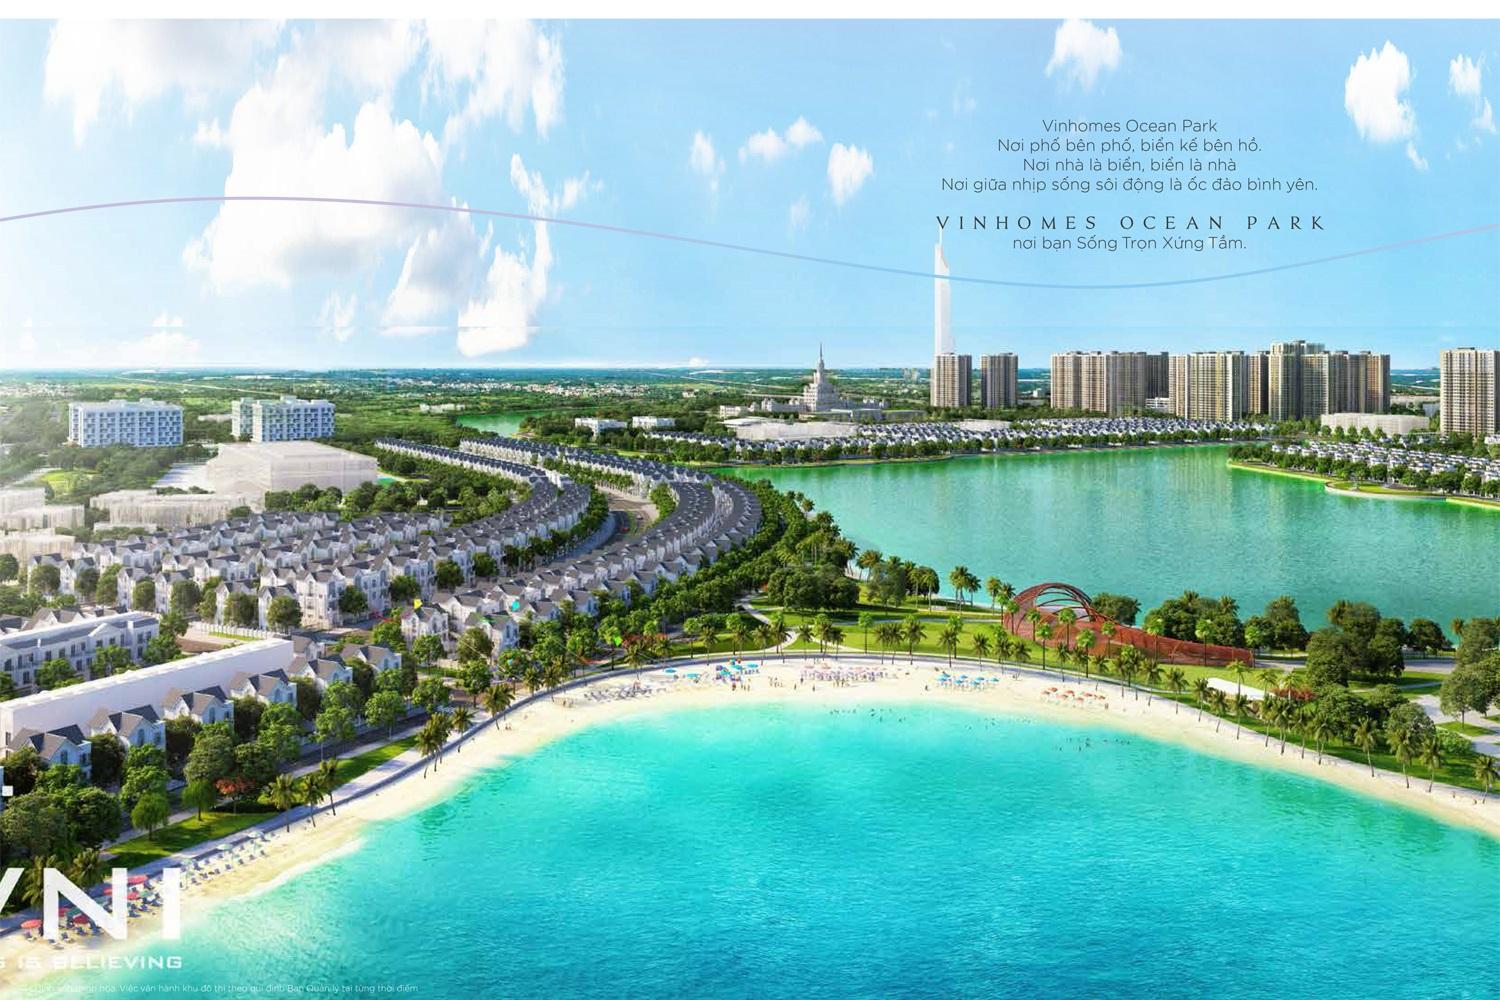 4 towers in section 1 - VINHOME OCEANS PARK – Gia Lam Dist - HN